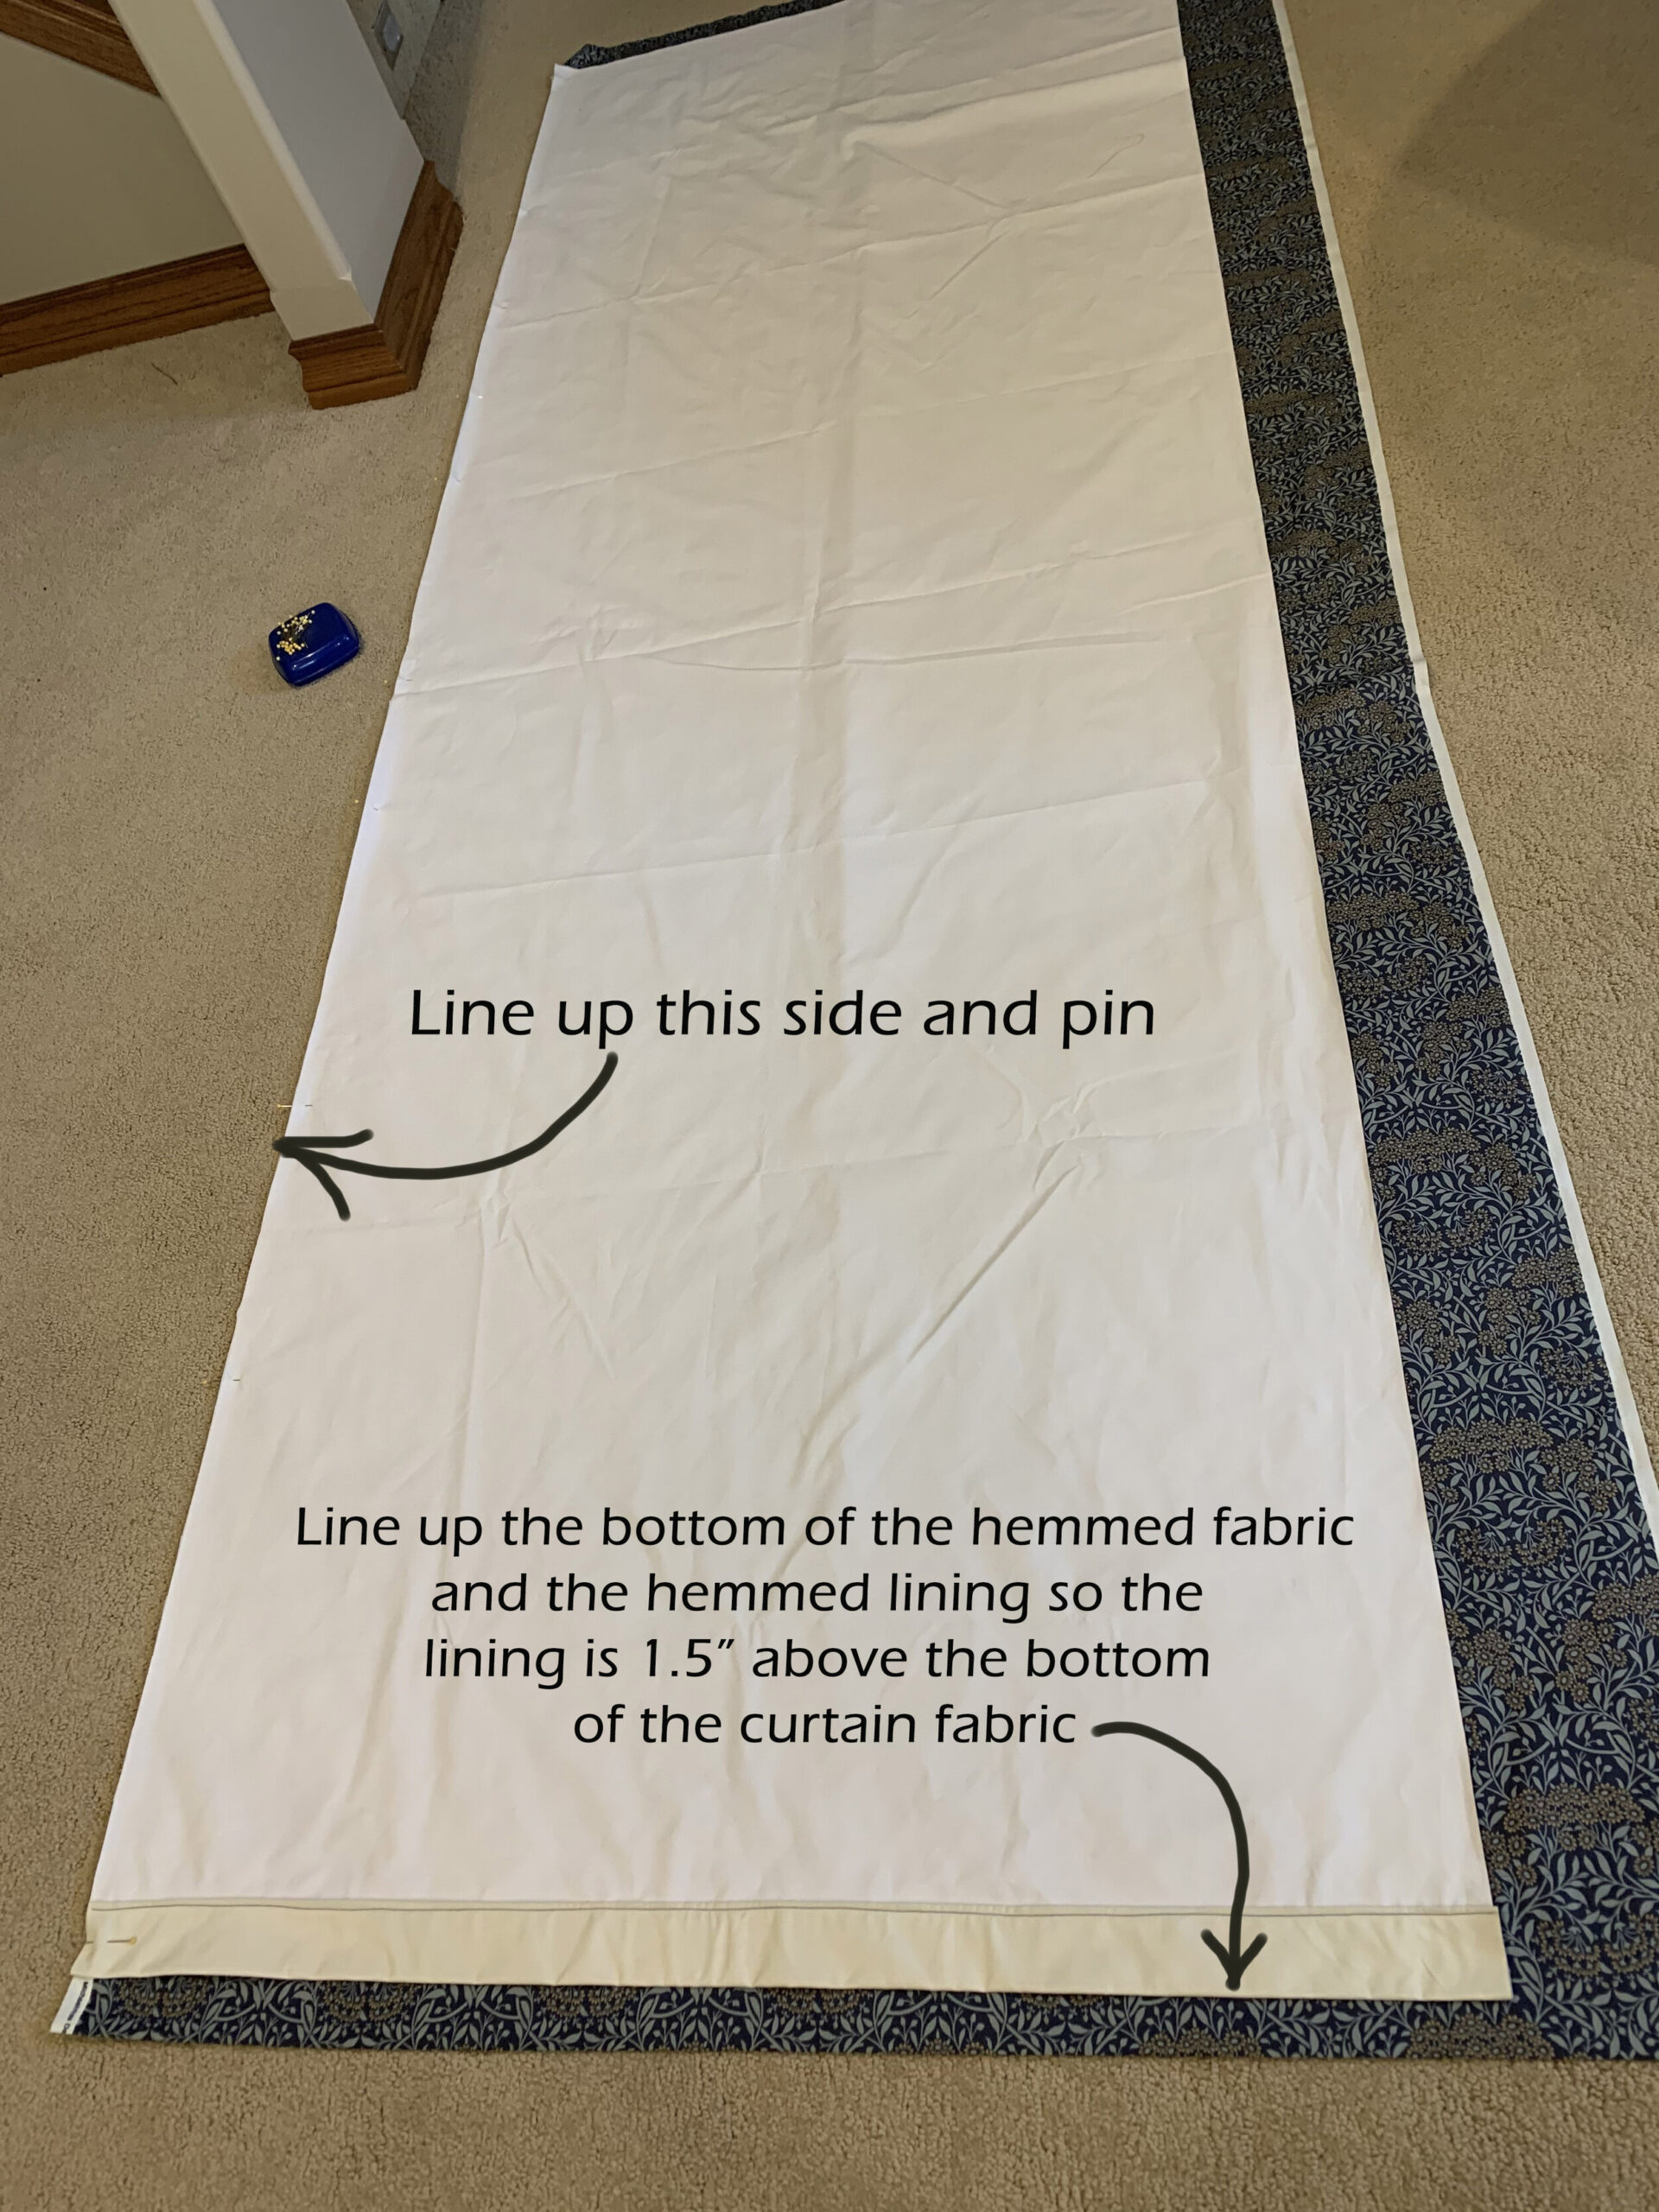 fabric laying on ground showing lining laying on top and lined up on one side and showing the lining 1.5" above the curtain fabric